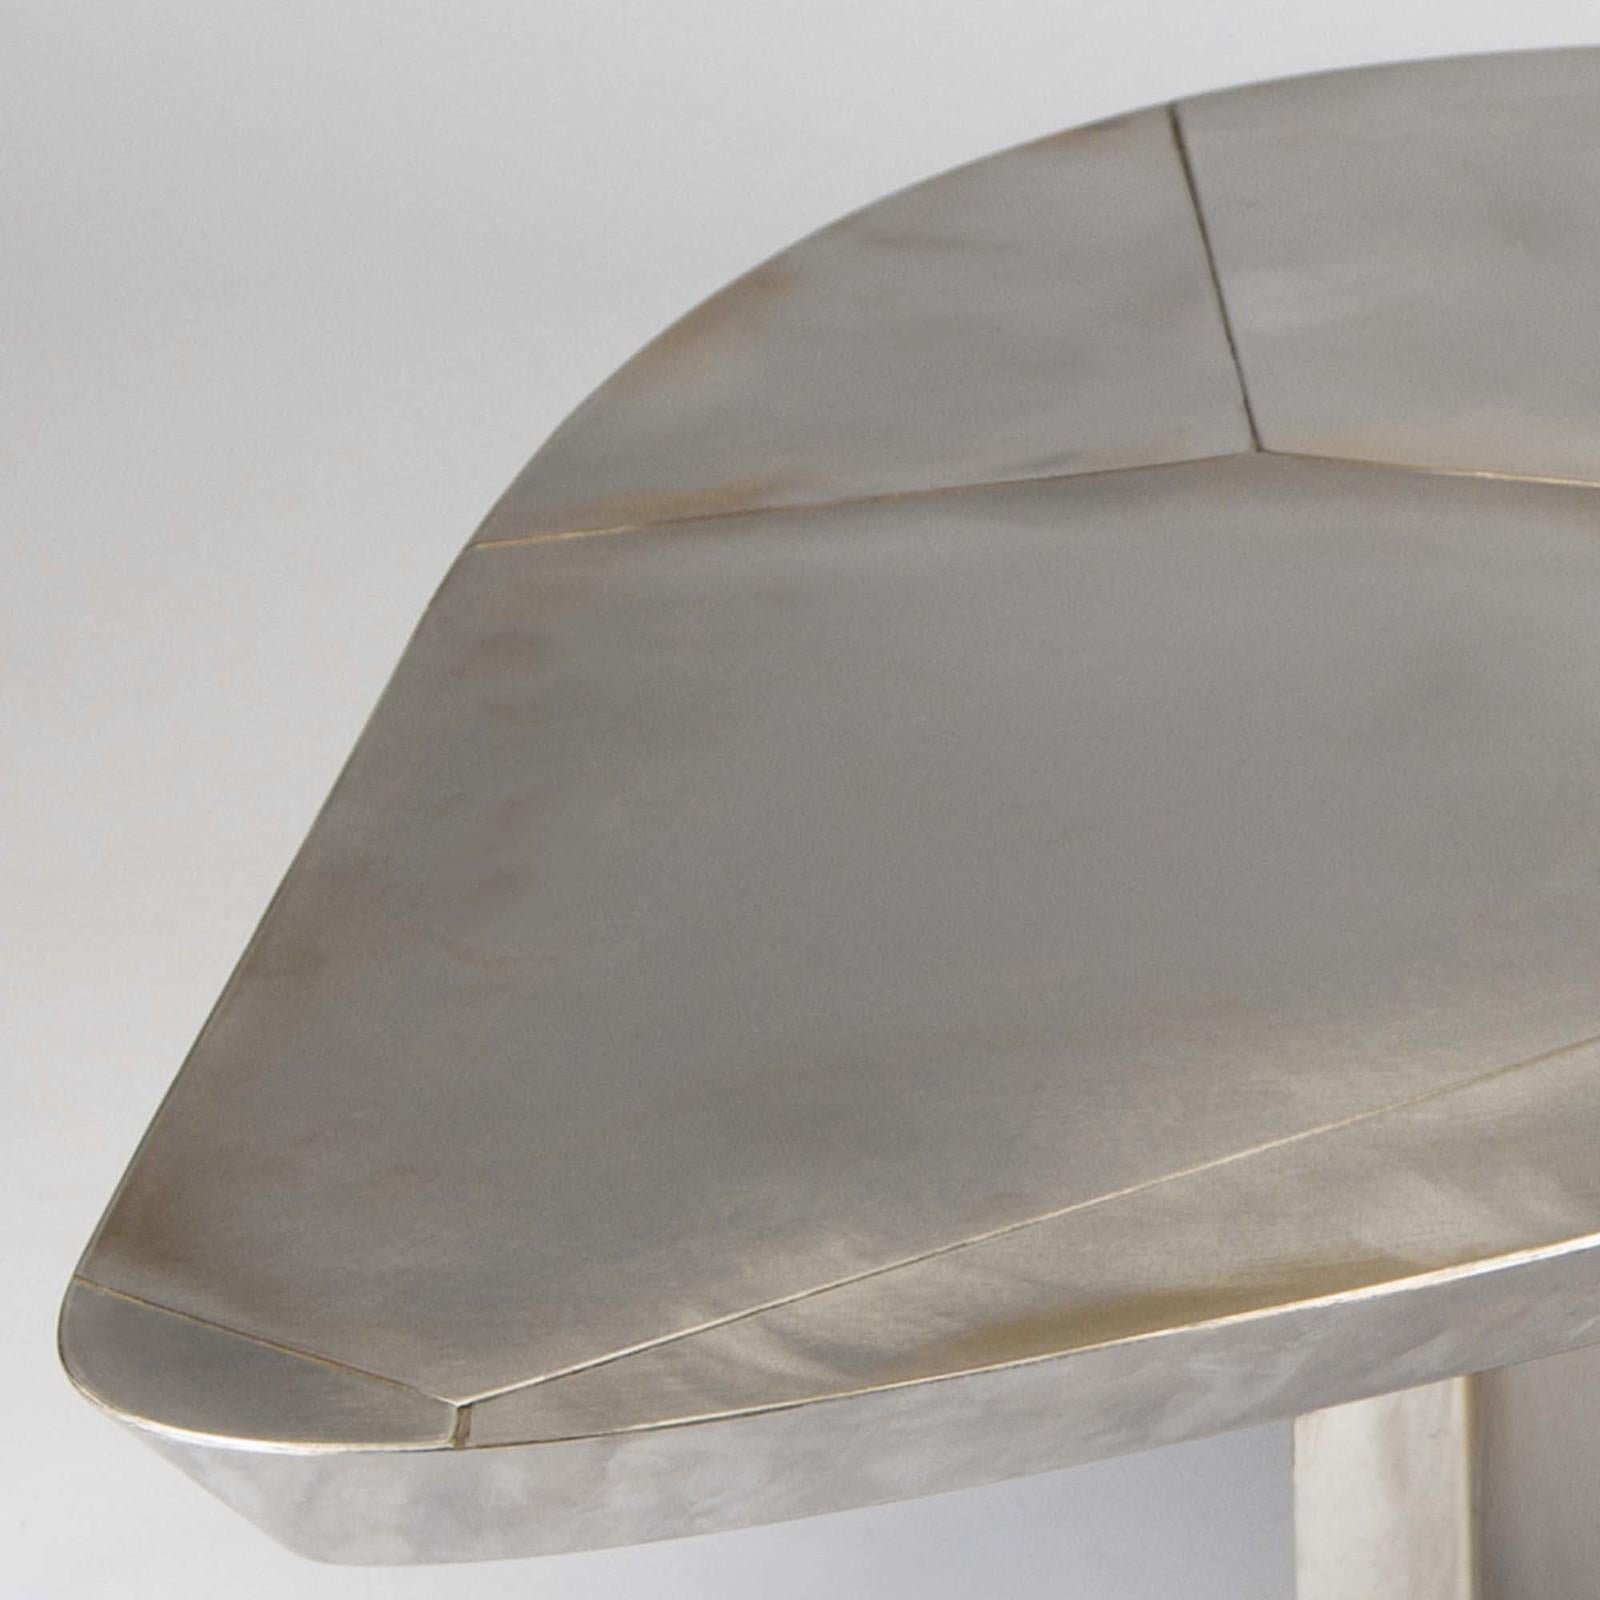 This unique and sophisticated coffee table is part of the Thinking Klein collection, inspired by the work of French artist Yves Klein. It was crafted entirely of steel with a multi-faceted base that supports a strikingly textured top with an